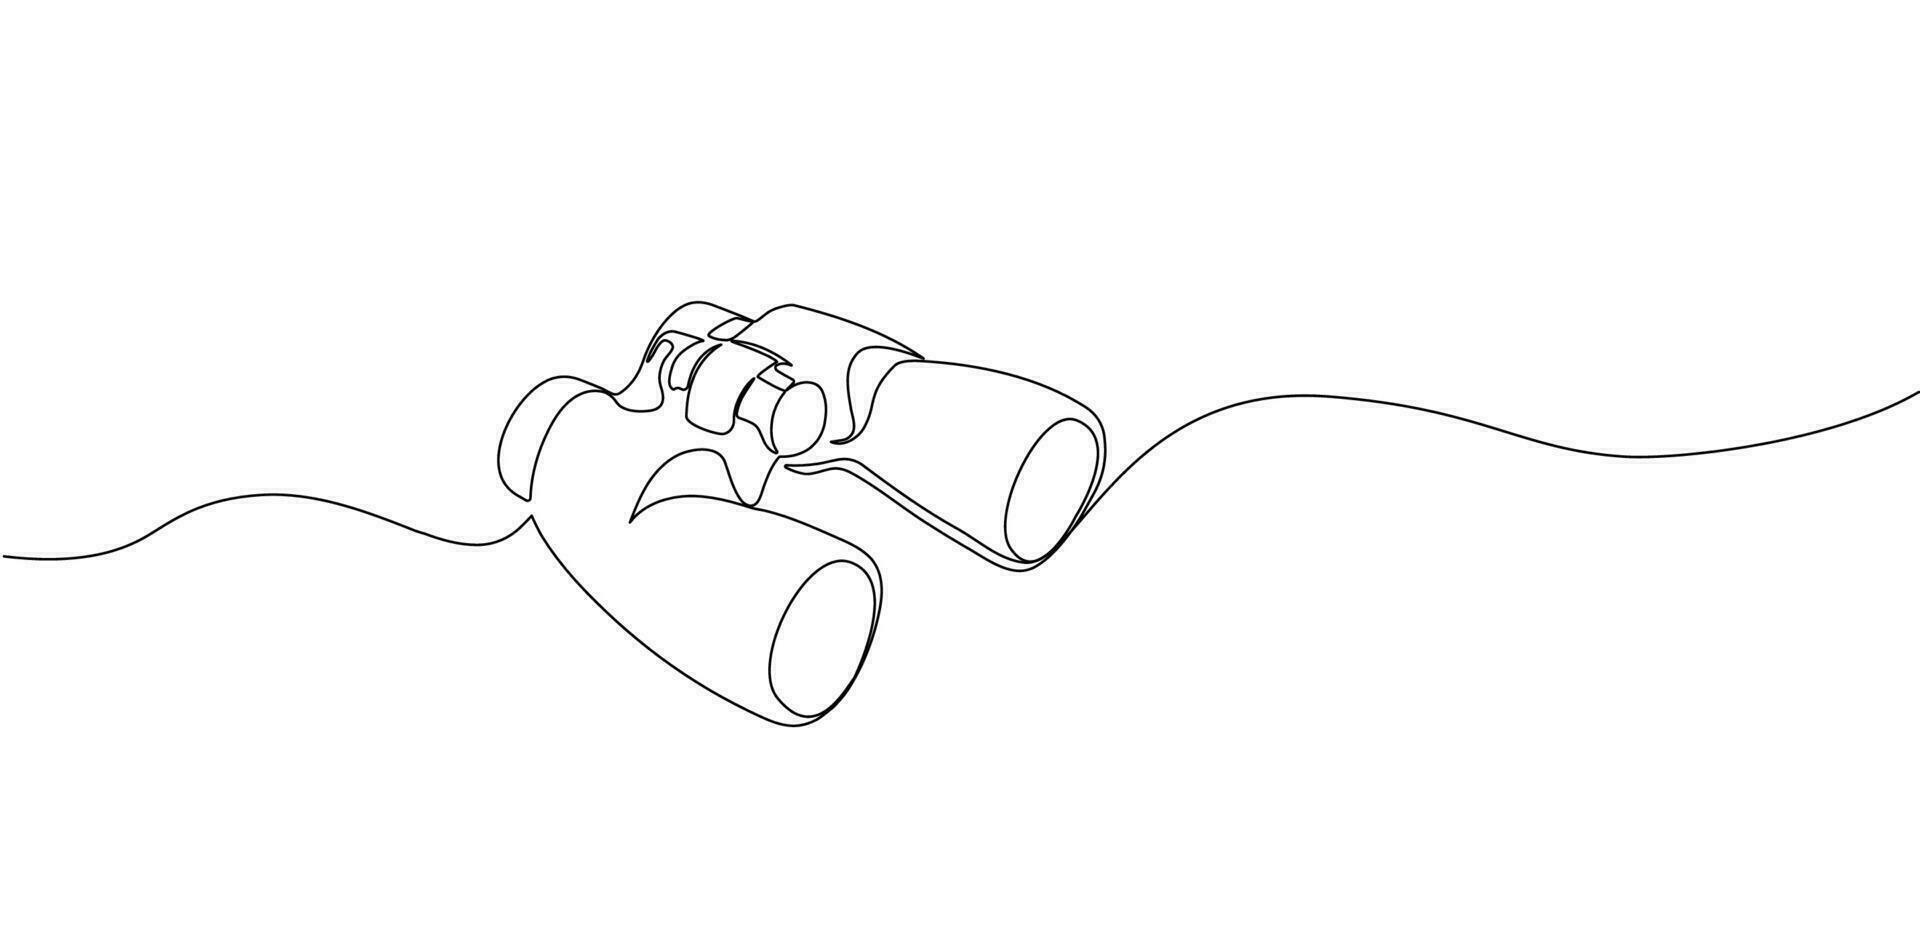 Continuous single one line of binoculars. Vector illustration.